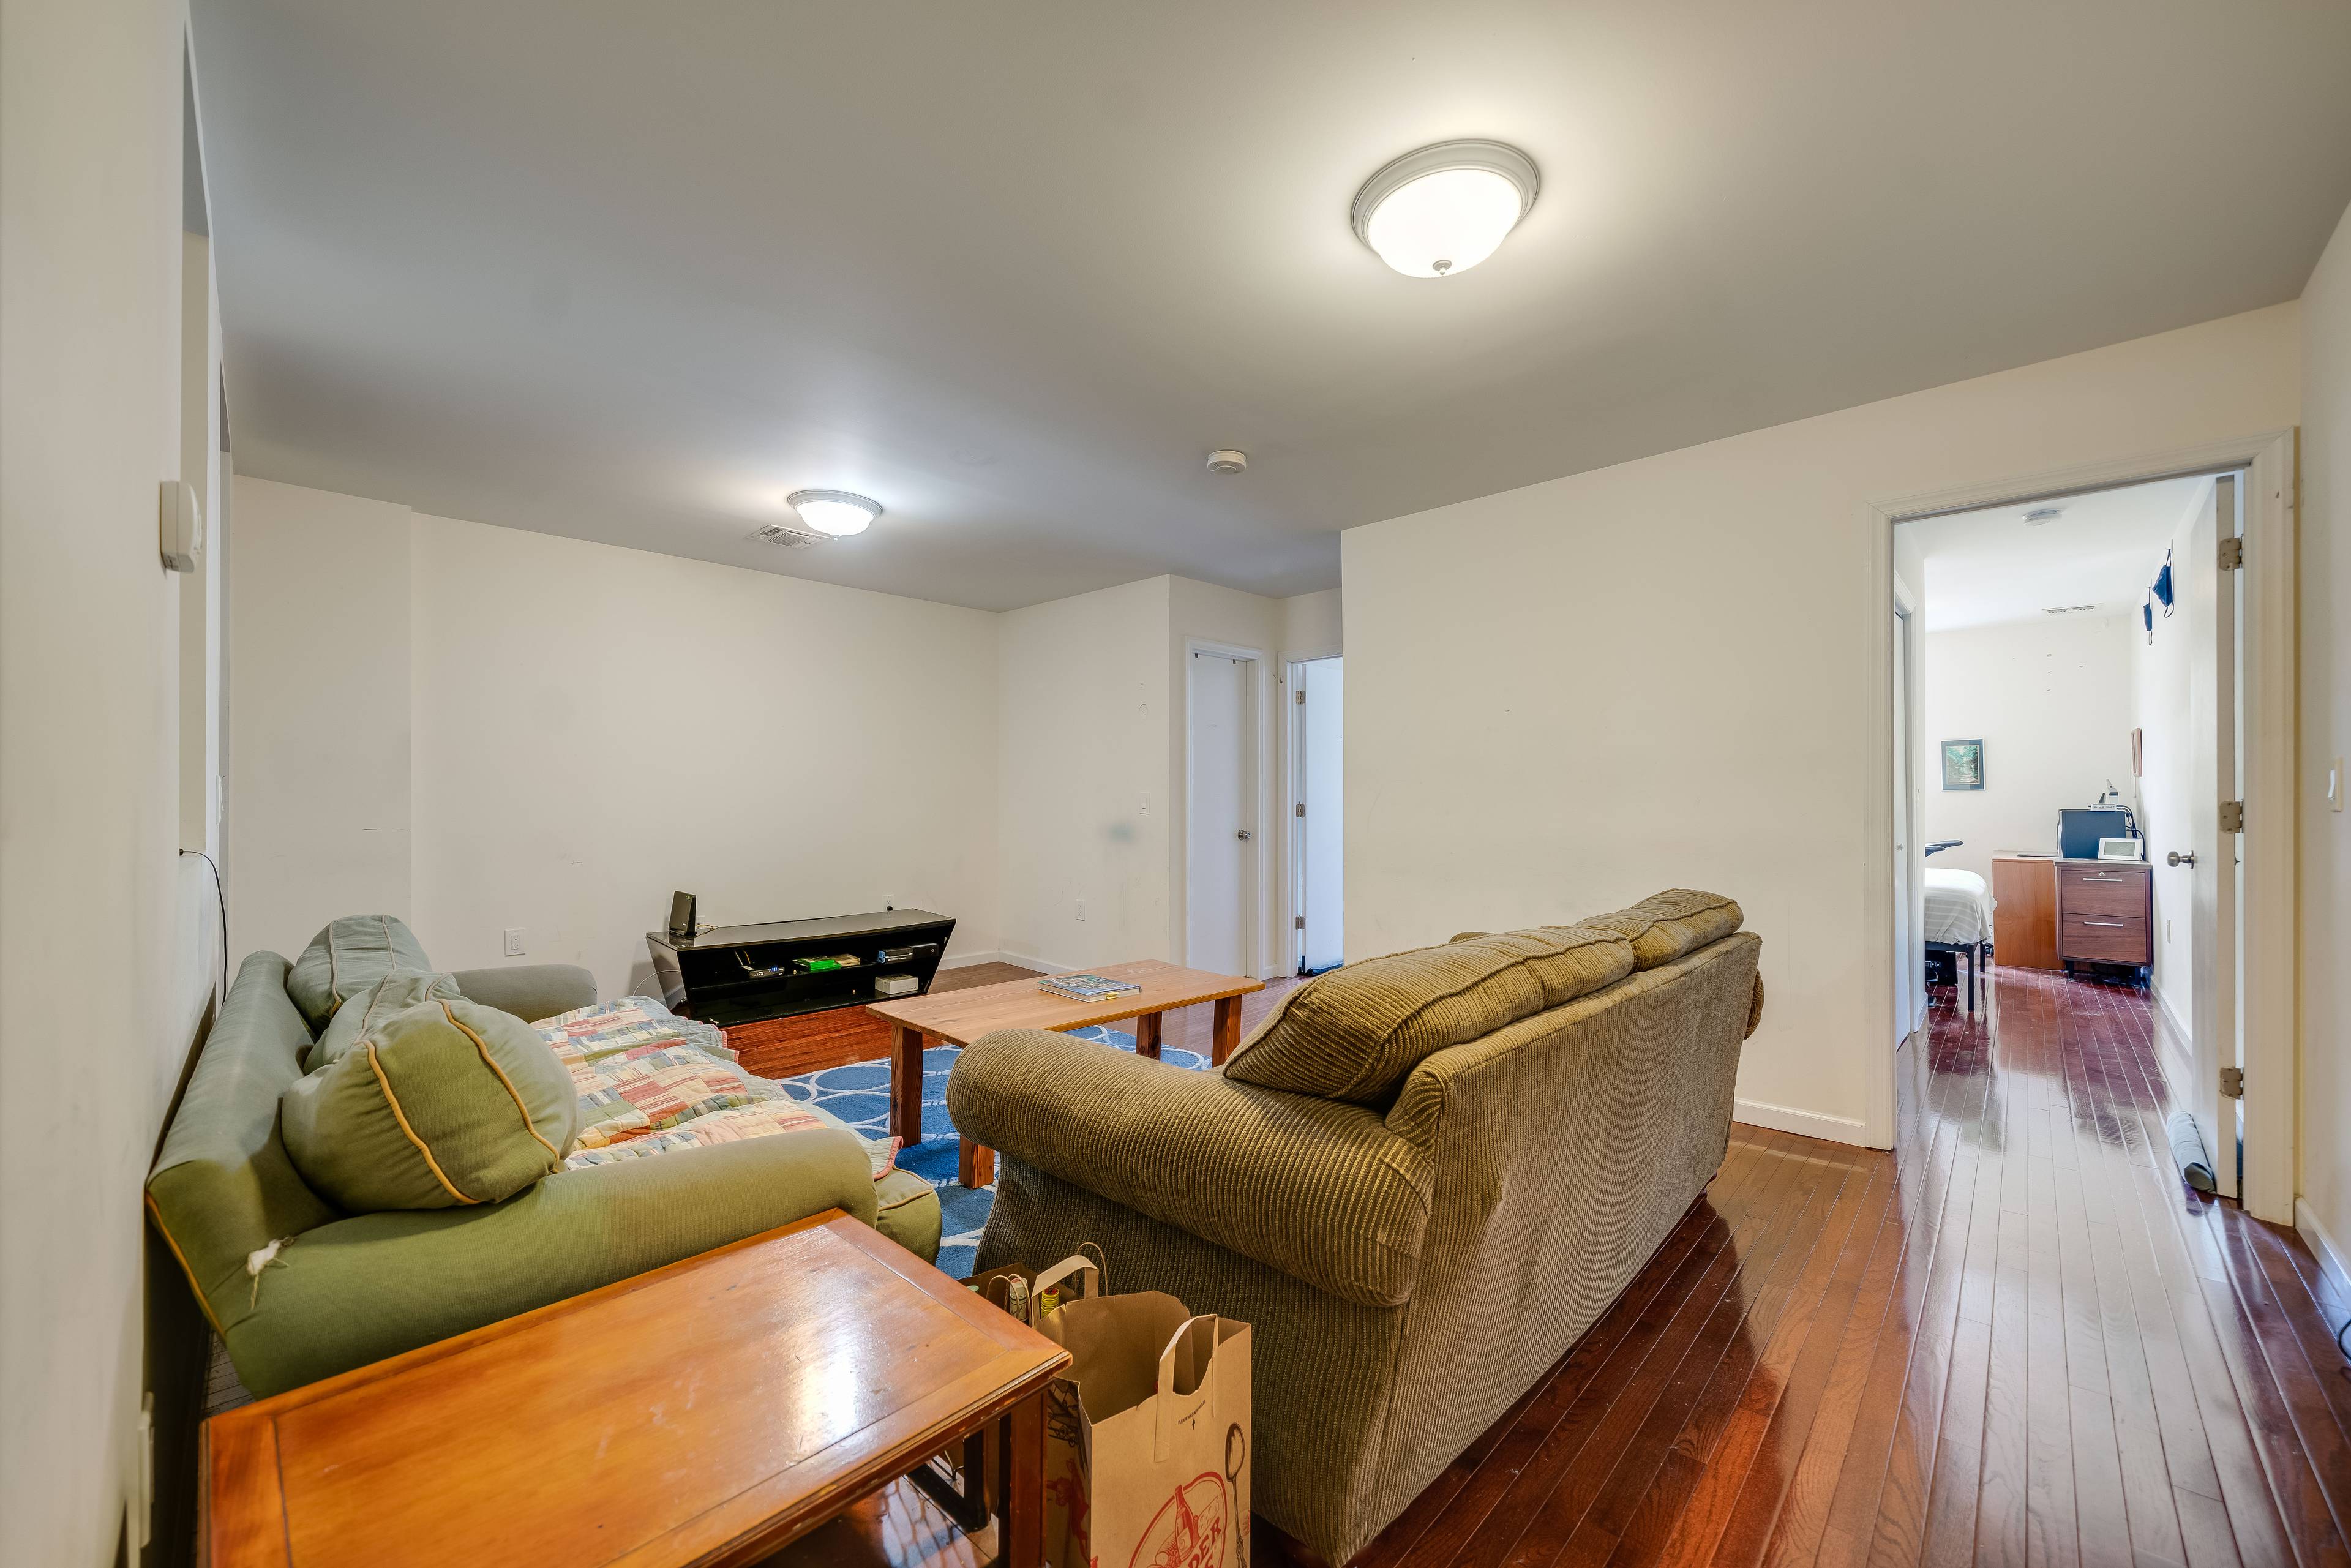 Sprawling 4 Bedroom 2 Bath Apartment located in the Heart of Midtown Hoboken!  Seconds to Stevens University, Washington Street Shops and Restaurants, Bus Outside your Door!  Central AC and Heating!